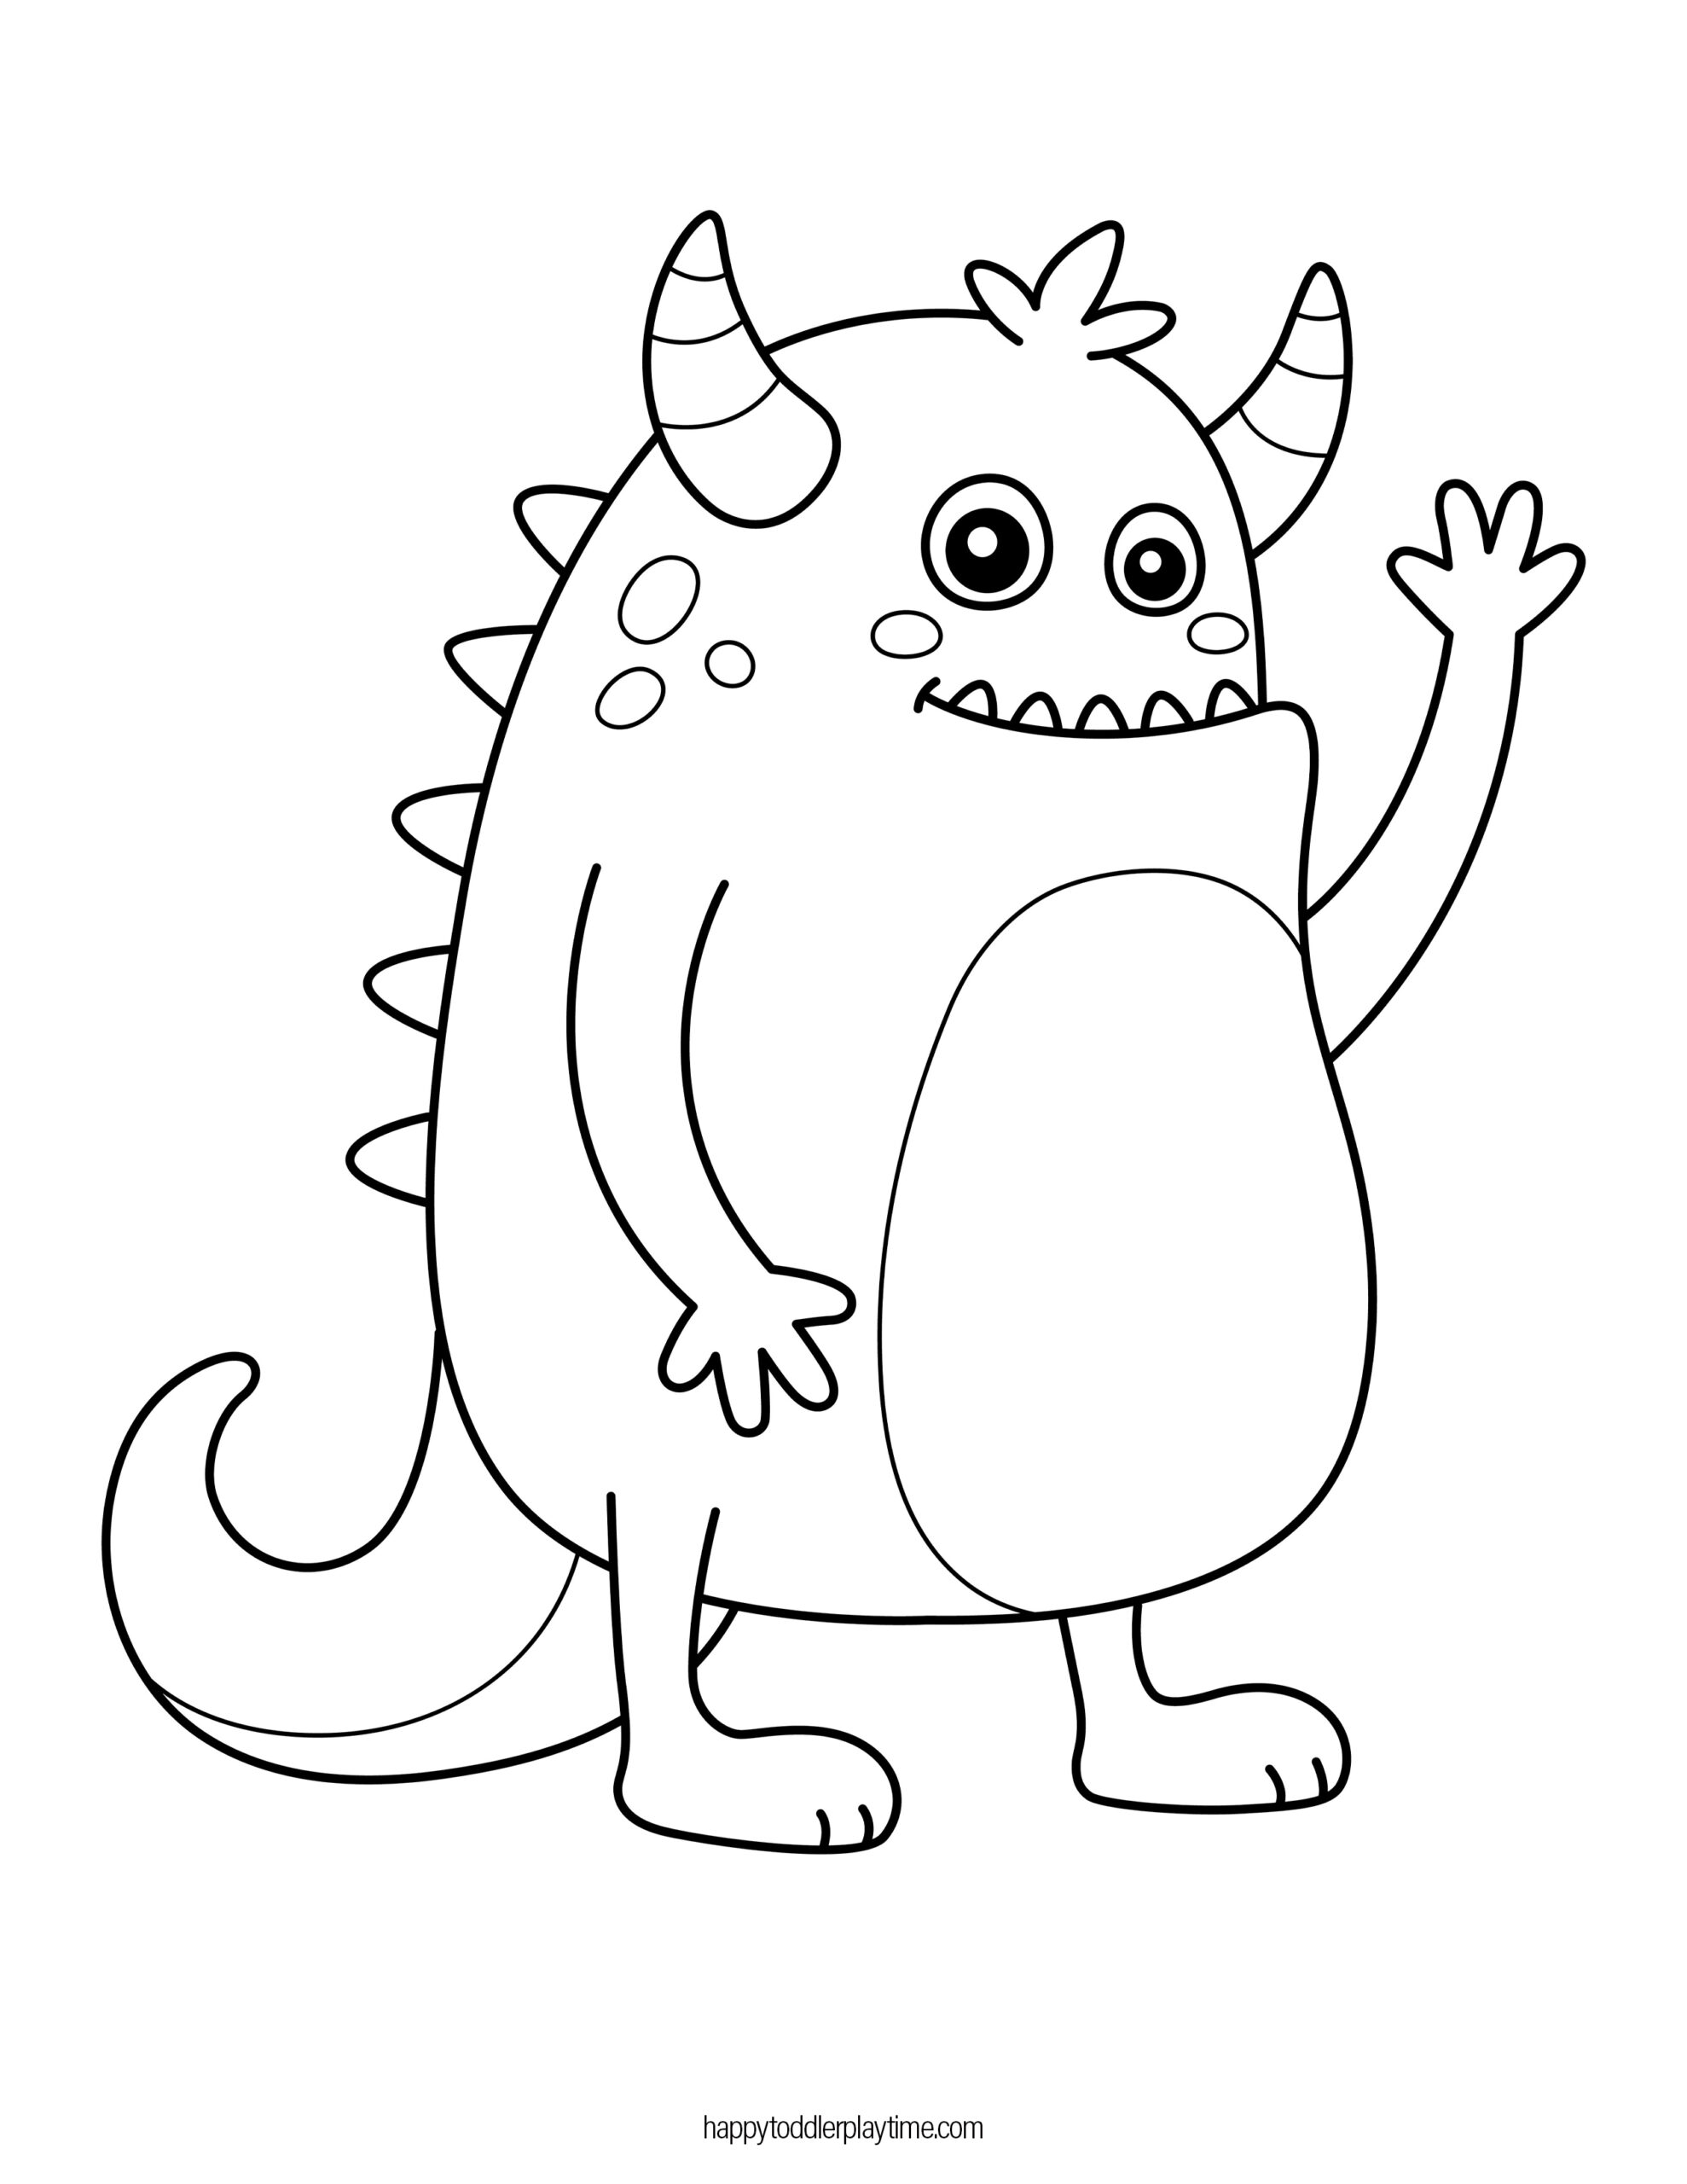 Monster coloring pages for kids